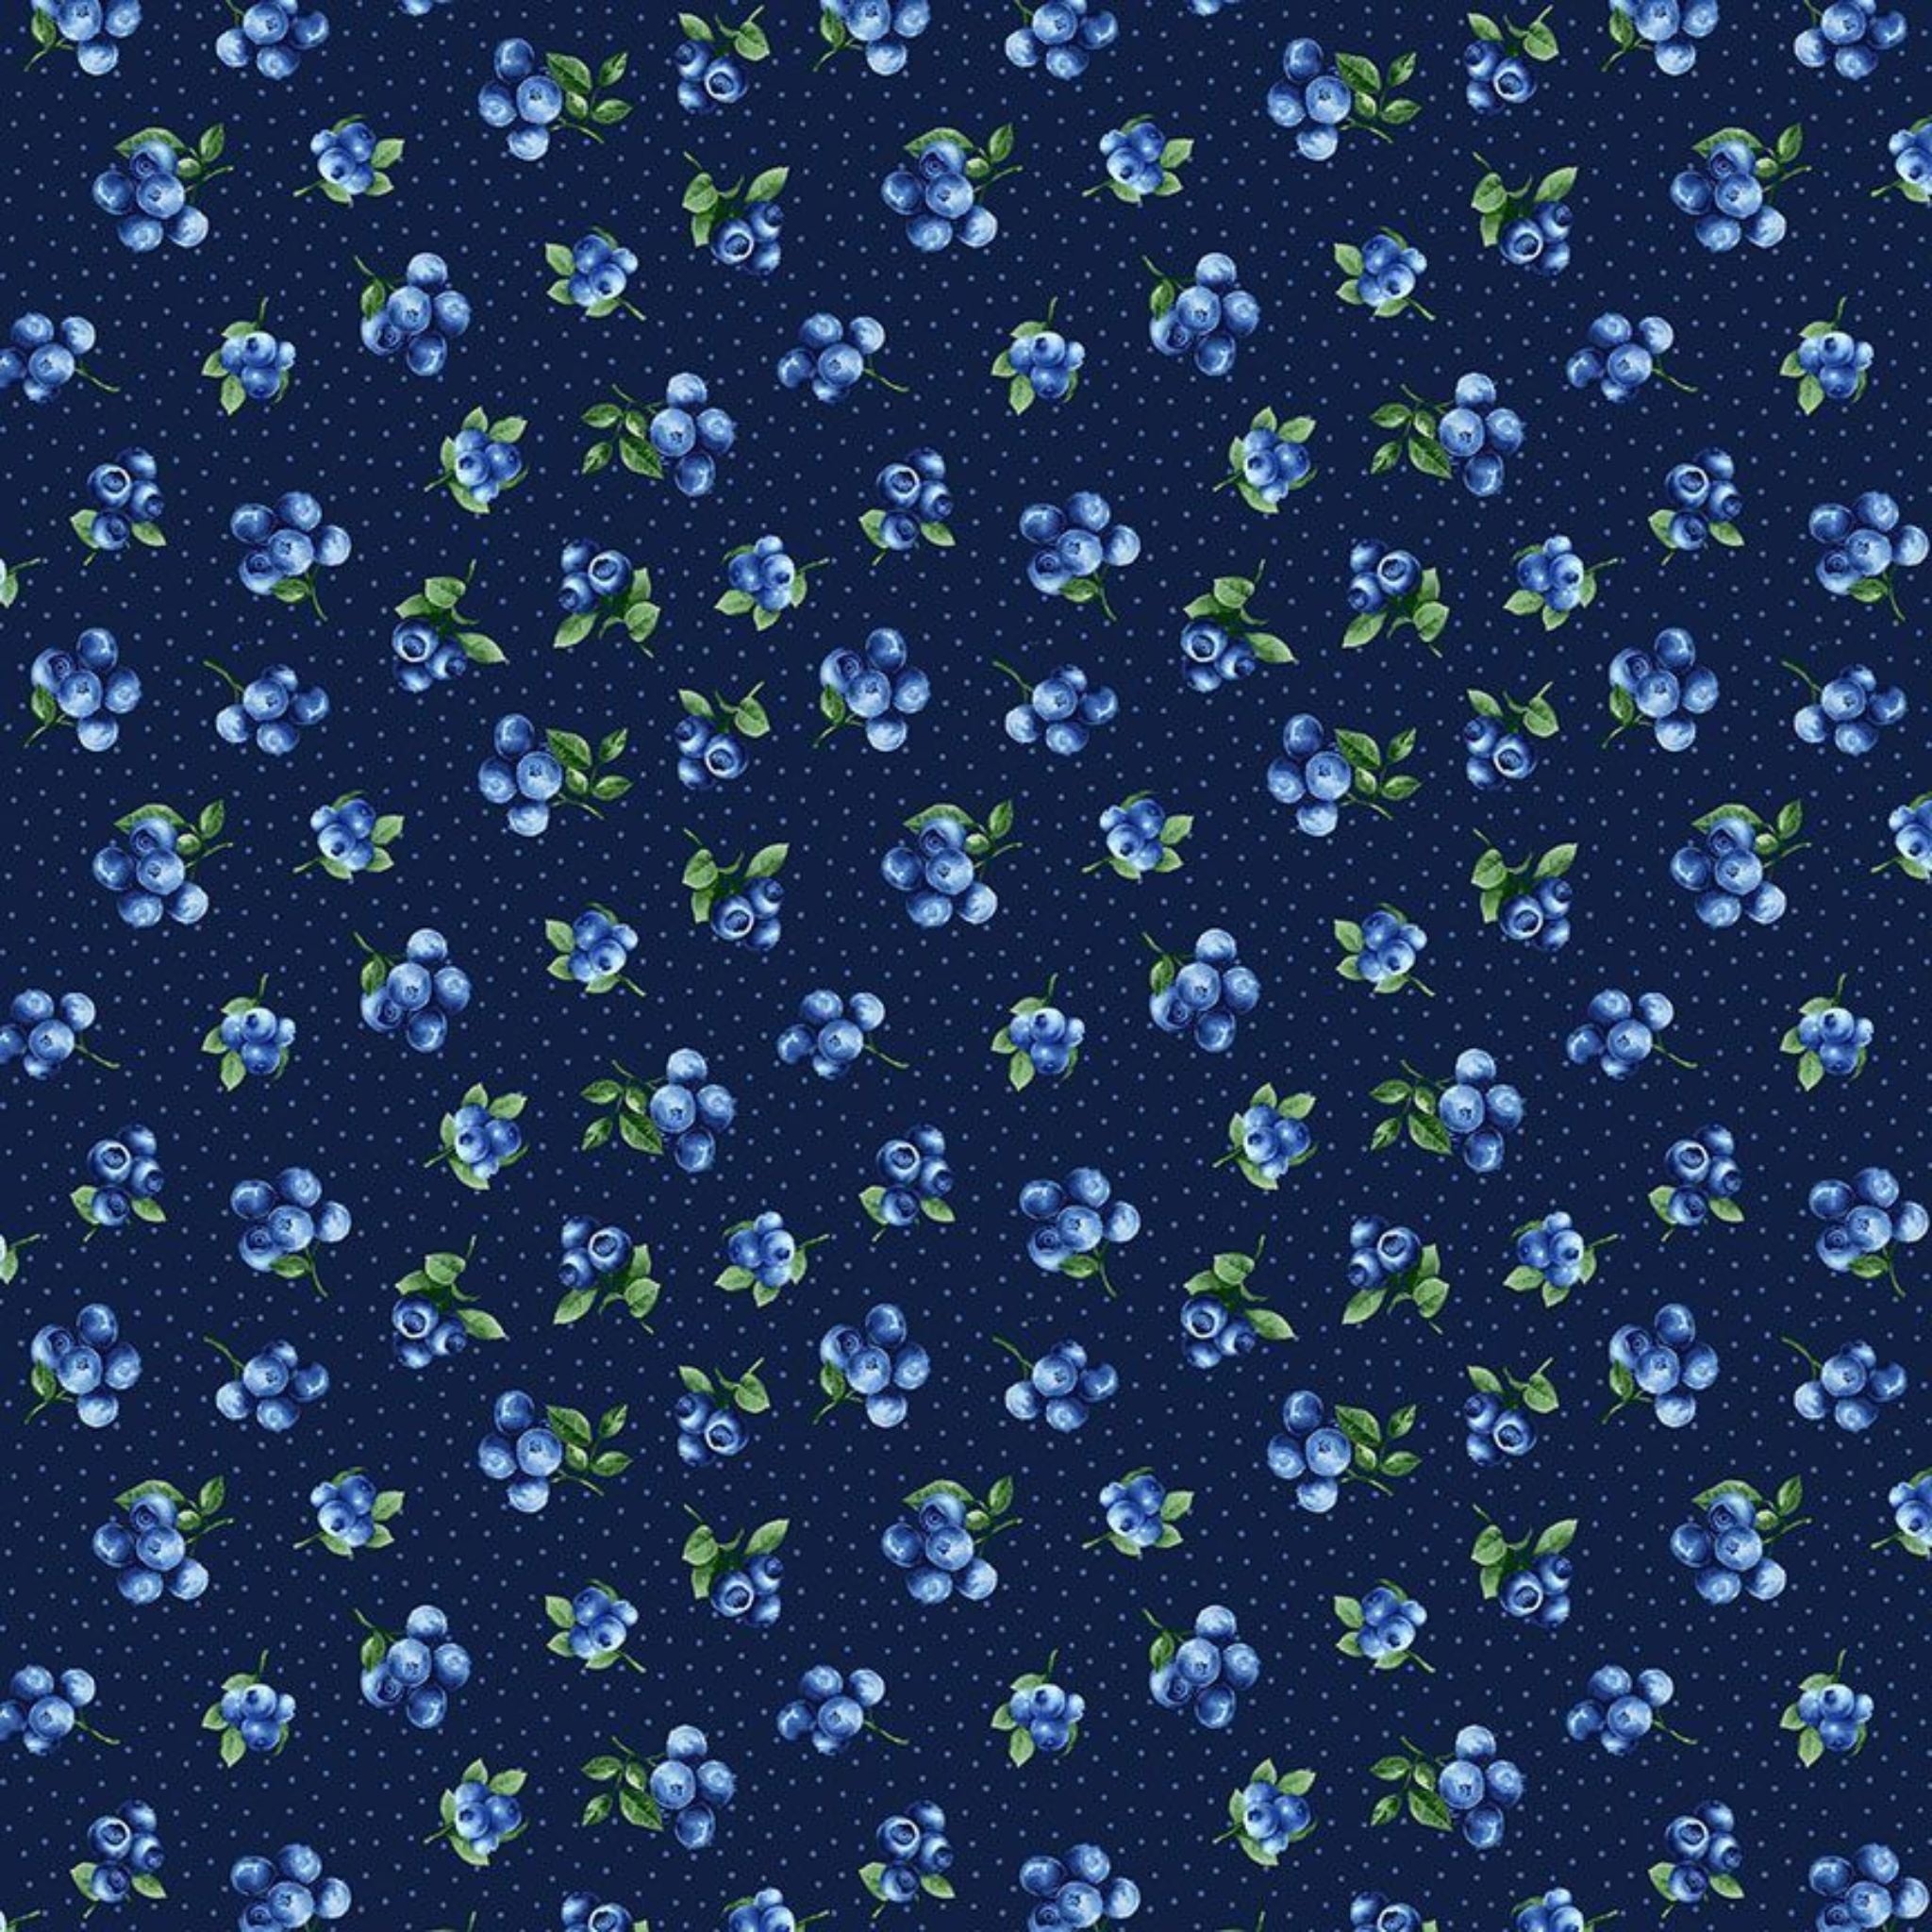 Blueberries on gingham cotton fabric - Blueberry Delight - Timeless Treasures